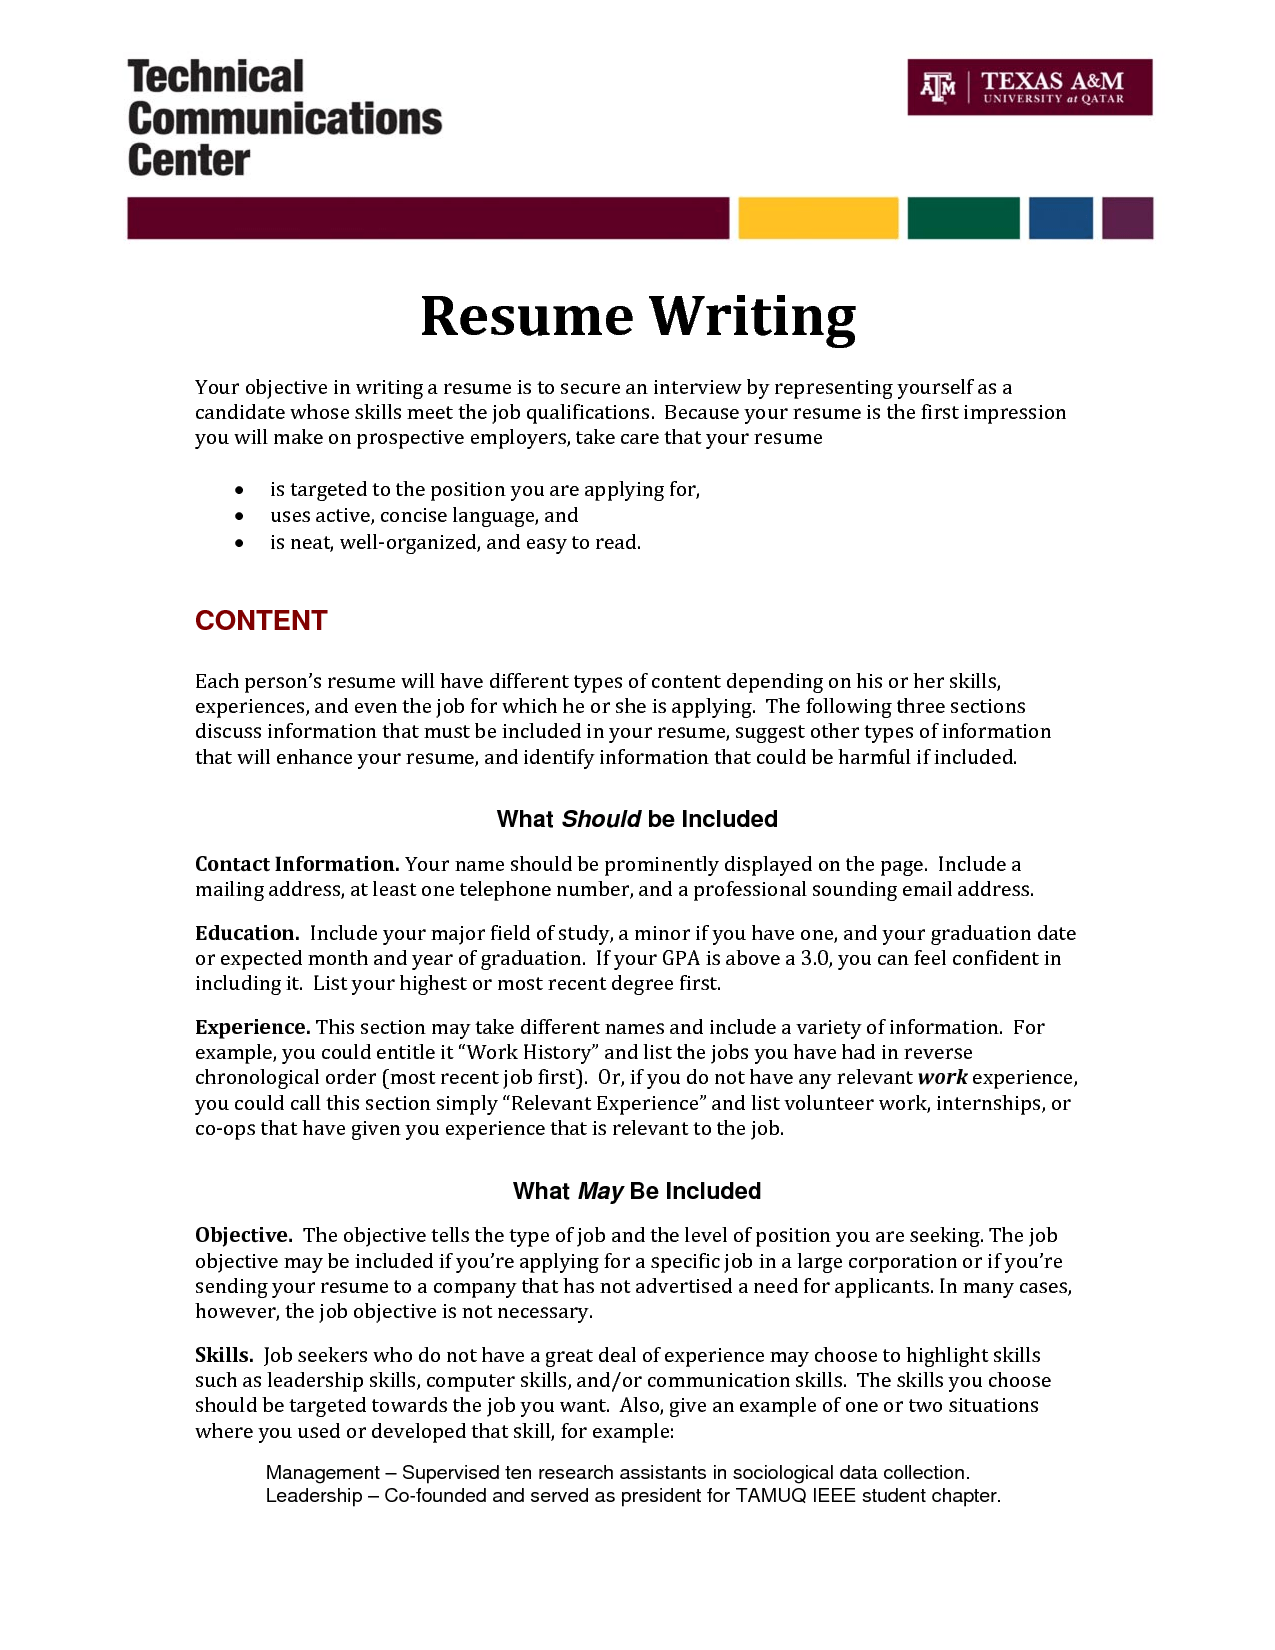 how-to-write-a-resume-fotolip